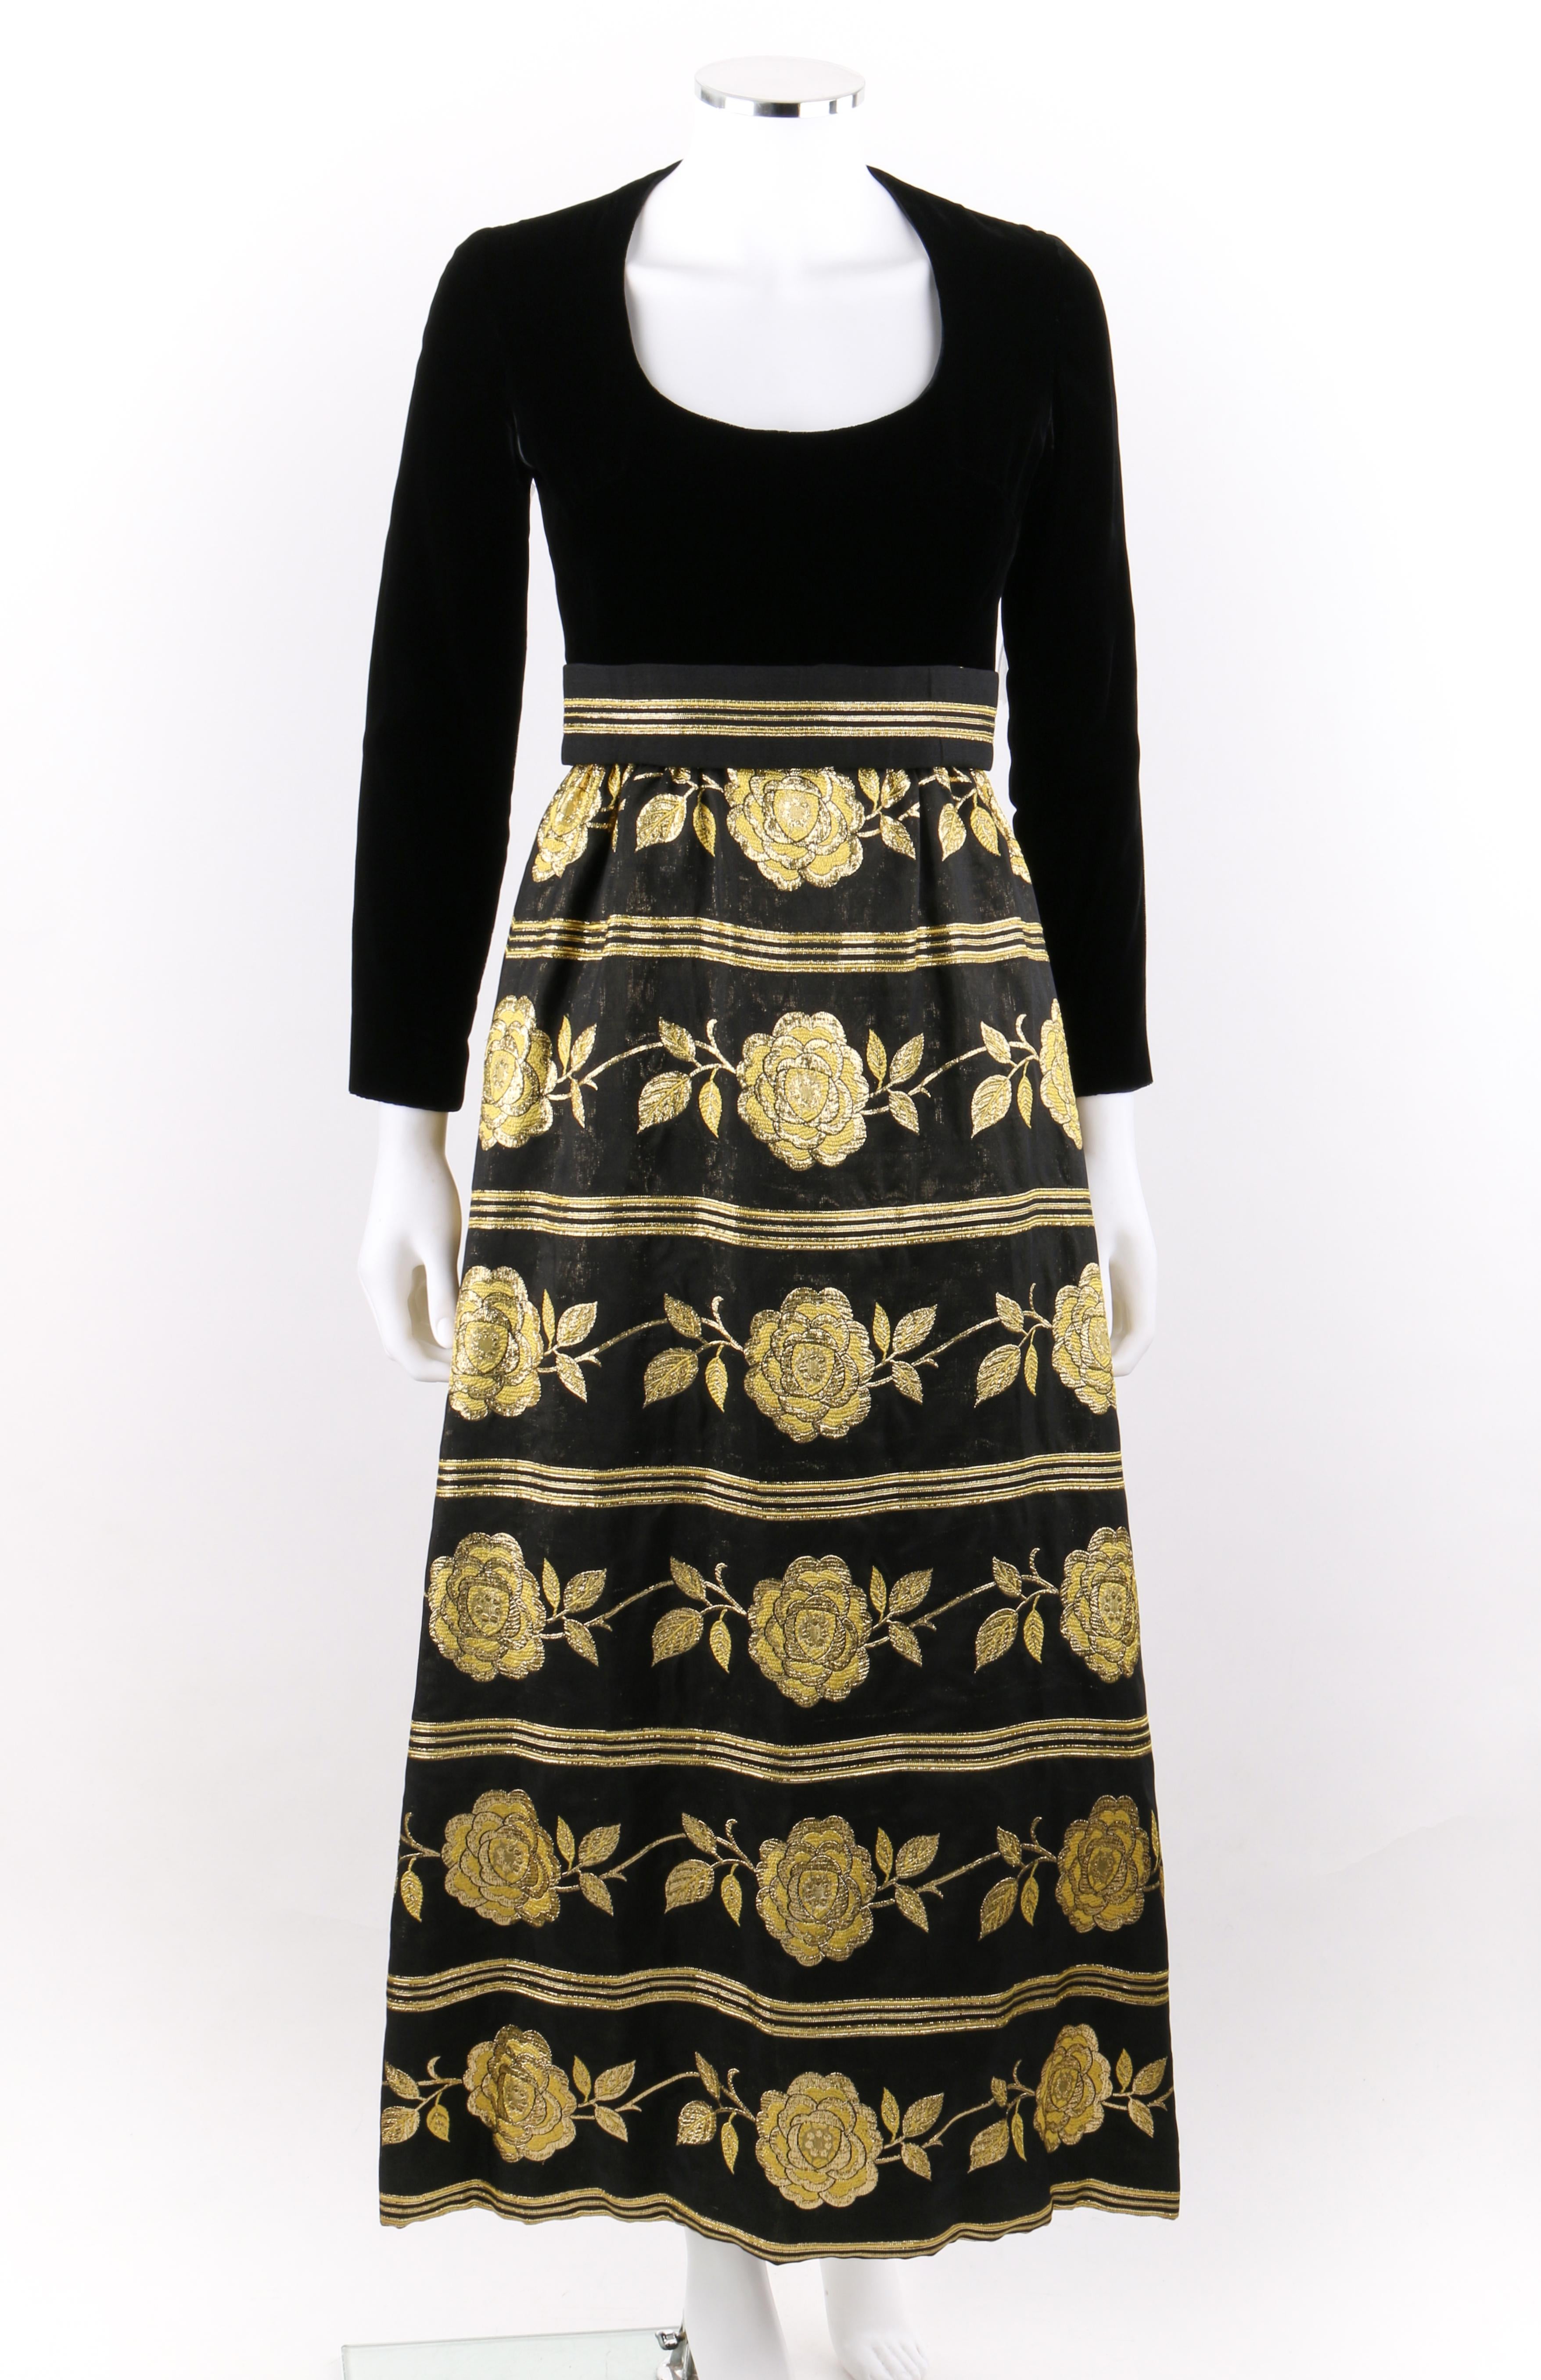 DESCRIPTION: c.1960's Black Velvet Metallic Gold Floral Rose Brocade Maxi Evening Dress
 
Circa: c.1960’s
Label(s): Union Label
Style: Maxi dress
Color(s): Black and shades of gold
Lined: Partially
Unmarked Fabric Content (feel of): Rayon;